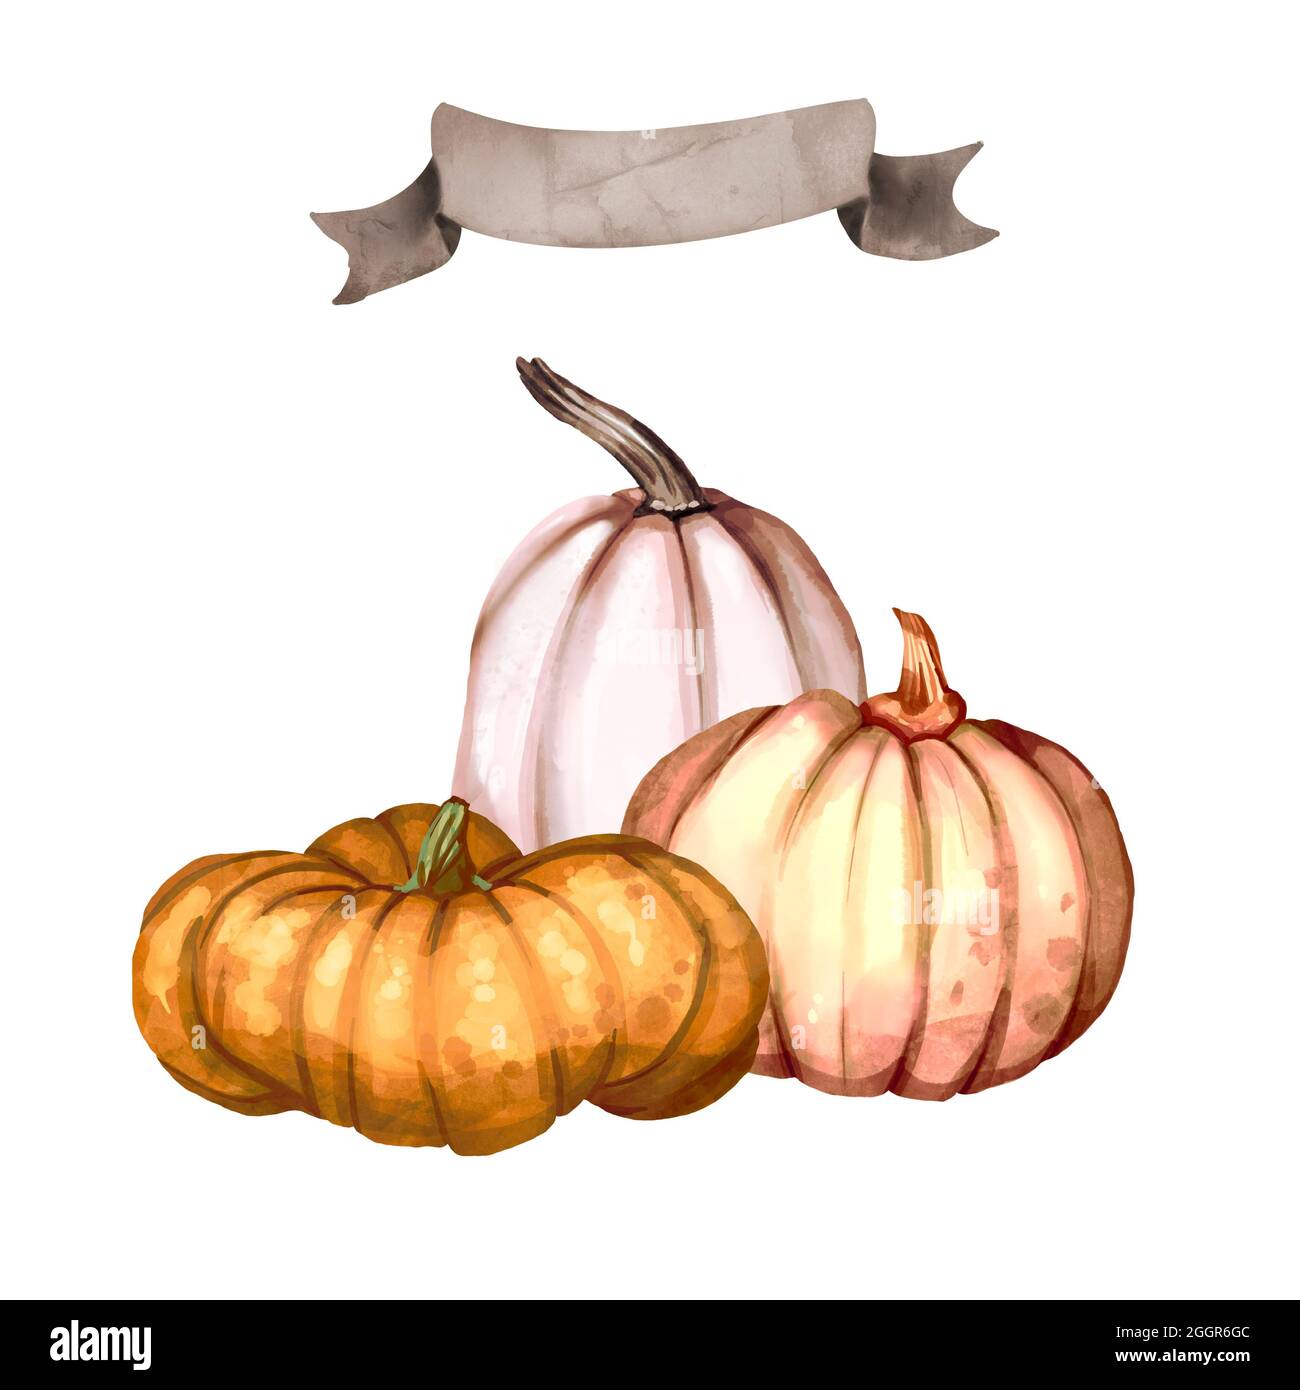 Watercolor pumpkin compositions. Orange and rose pumpkin. Isolated background illustration Stock Photo